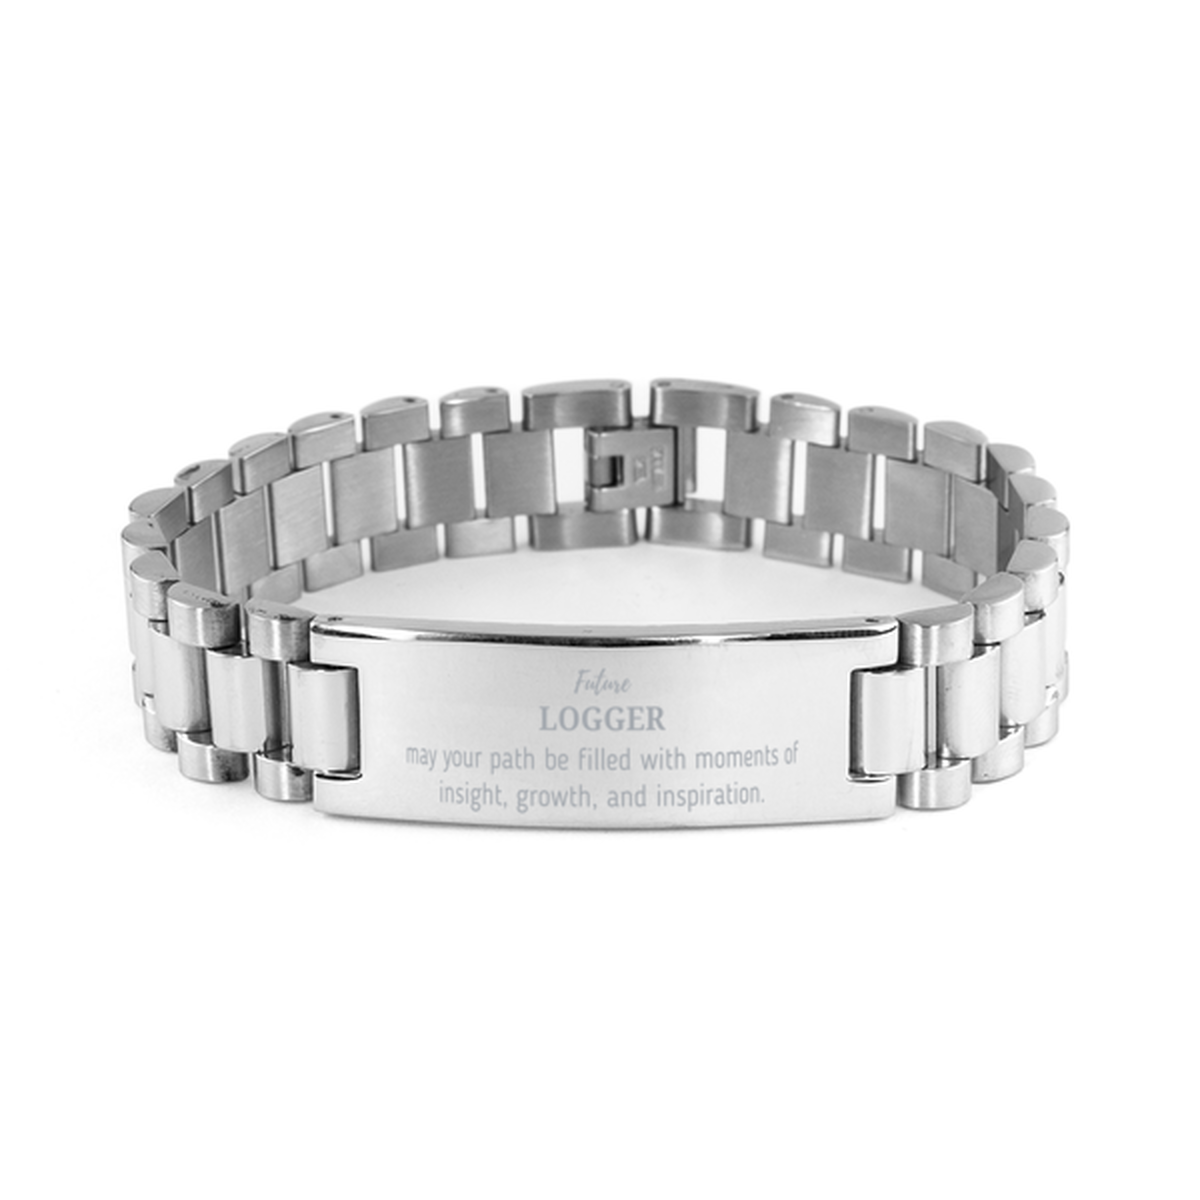 Future Logger Gifts, May your path be filled with moments of insight, Graduation Gifts for New Logger, Christmas Unique Ladder Stainless Steel Bracelet For Men, Women, Friends